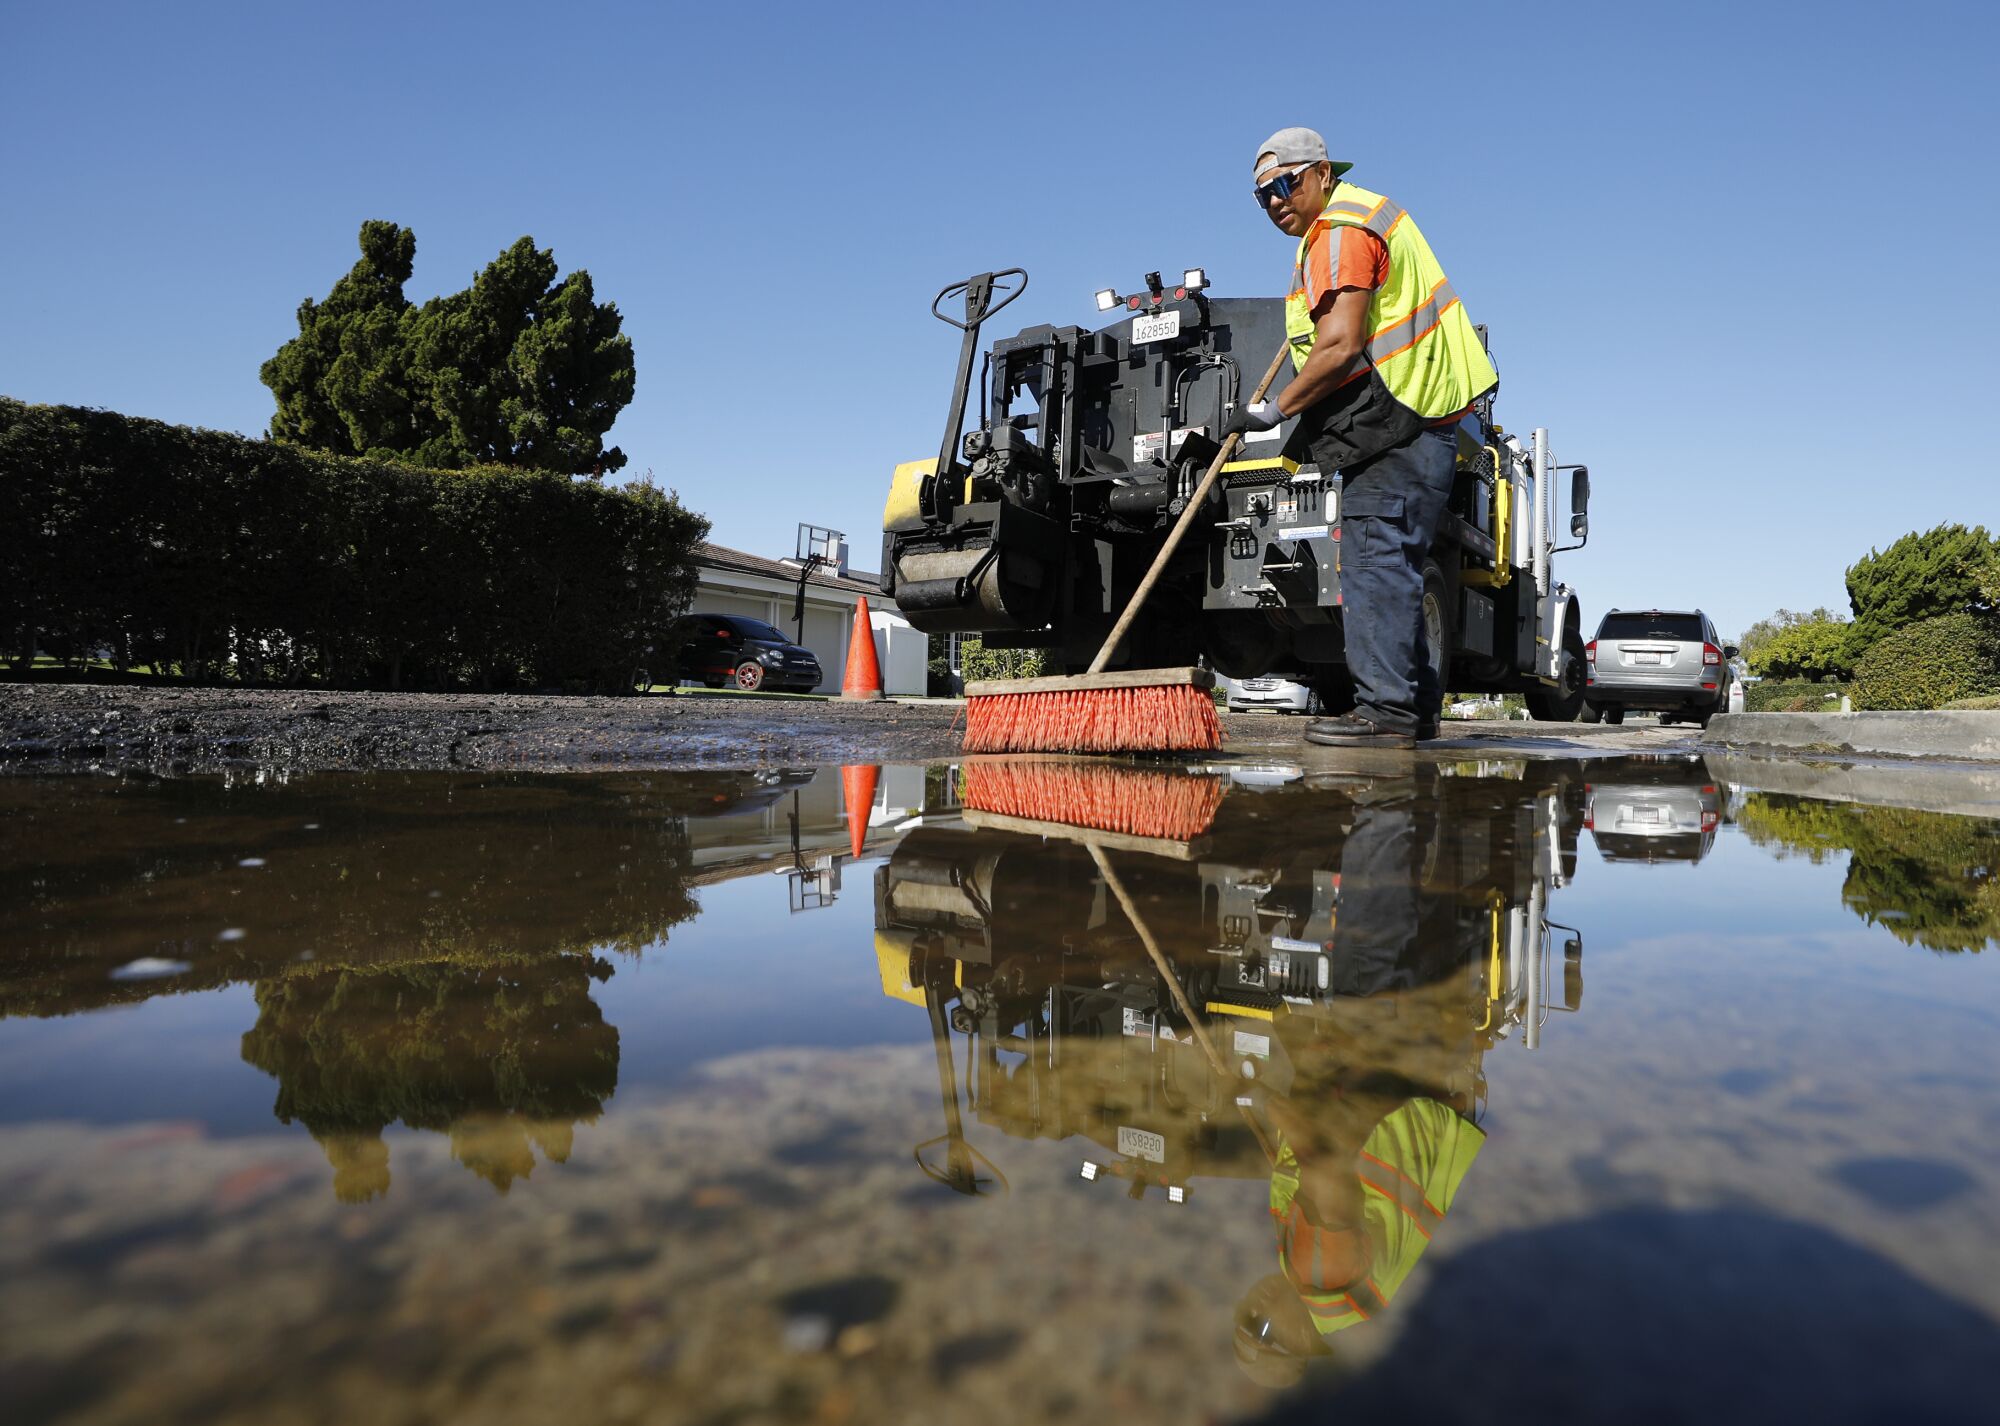 Anthony Ortega with the City of San Diego clears water out of pothole to prepare it for repair 